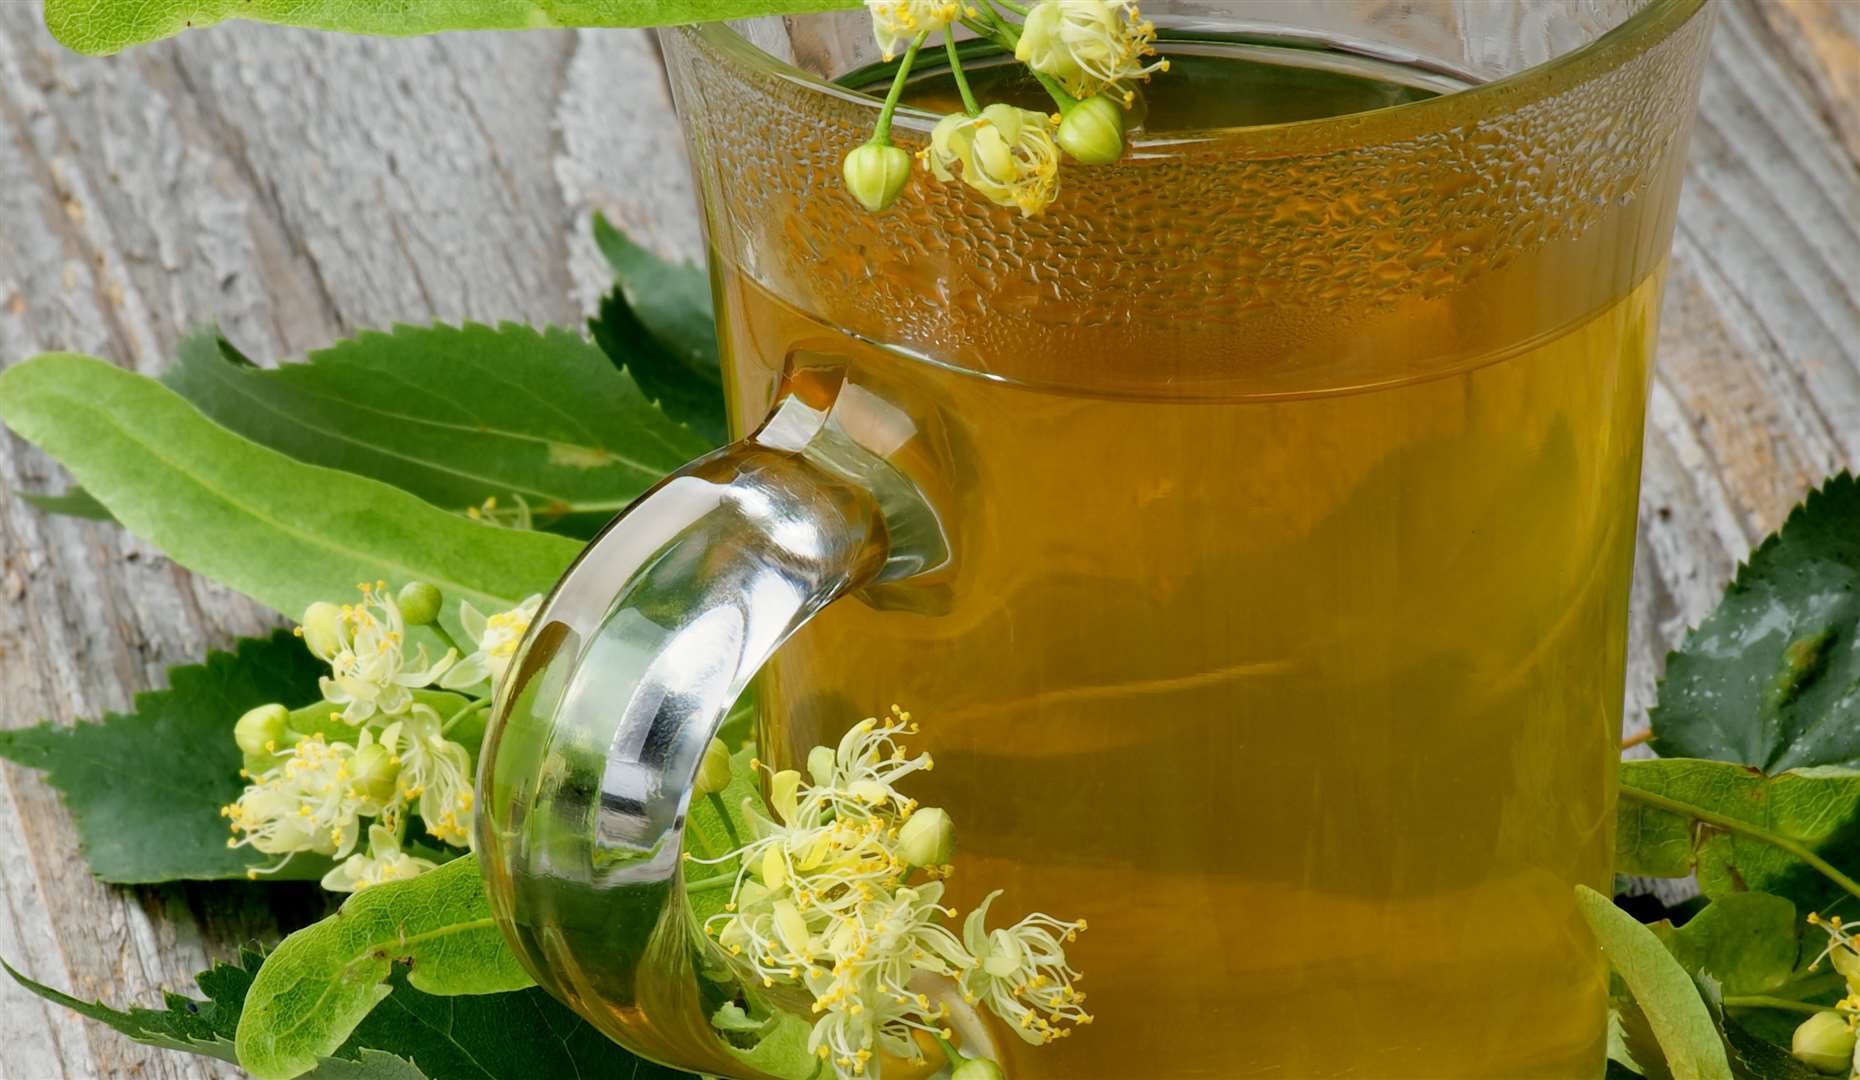 Some of the advantages of green tea include improved brain function, fat loss and a lower risk of cancer.